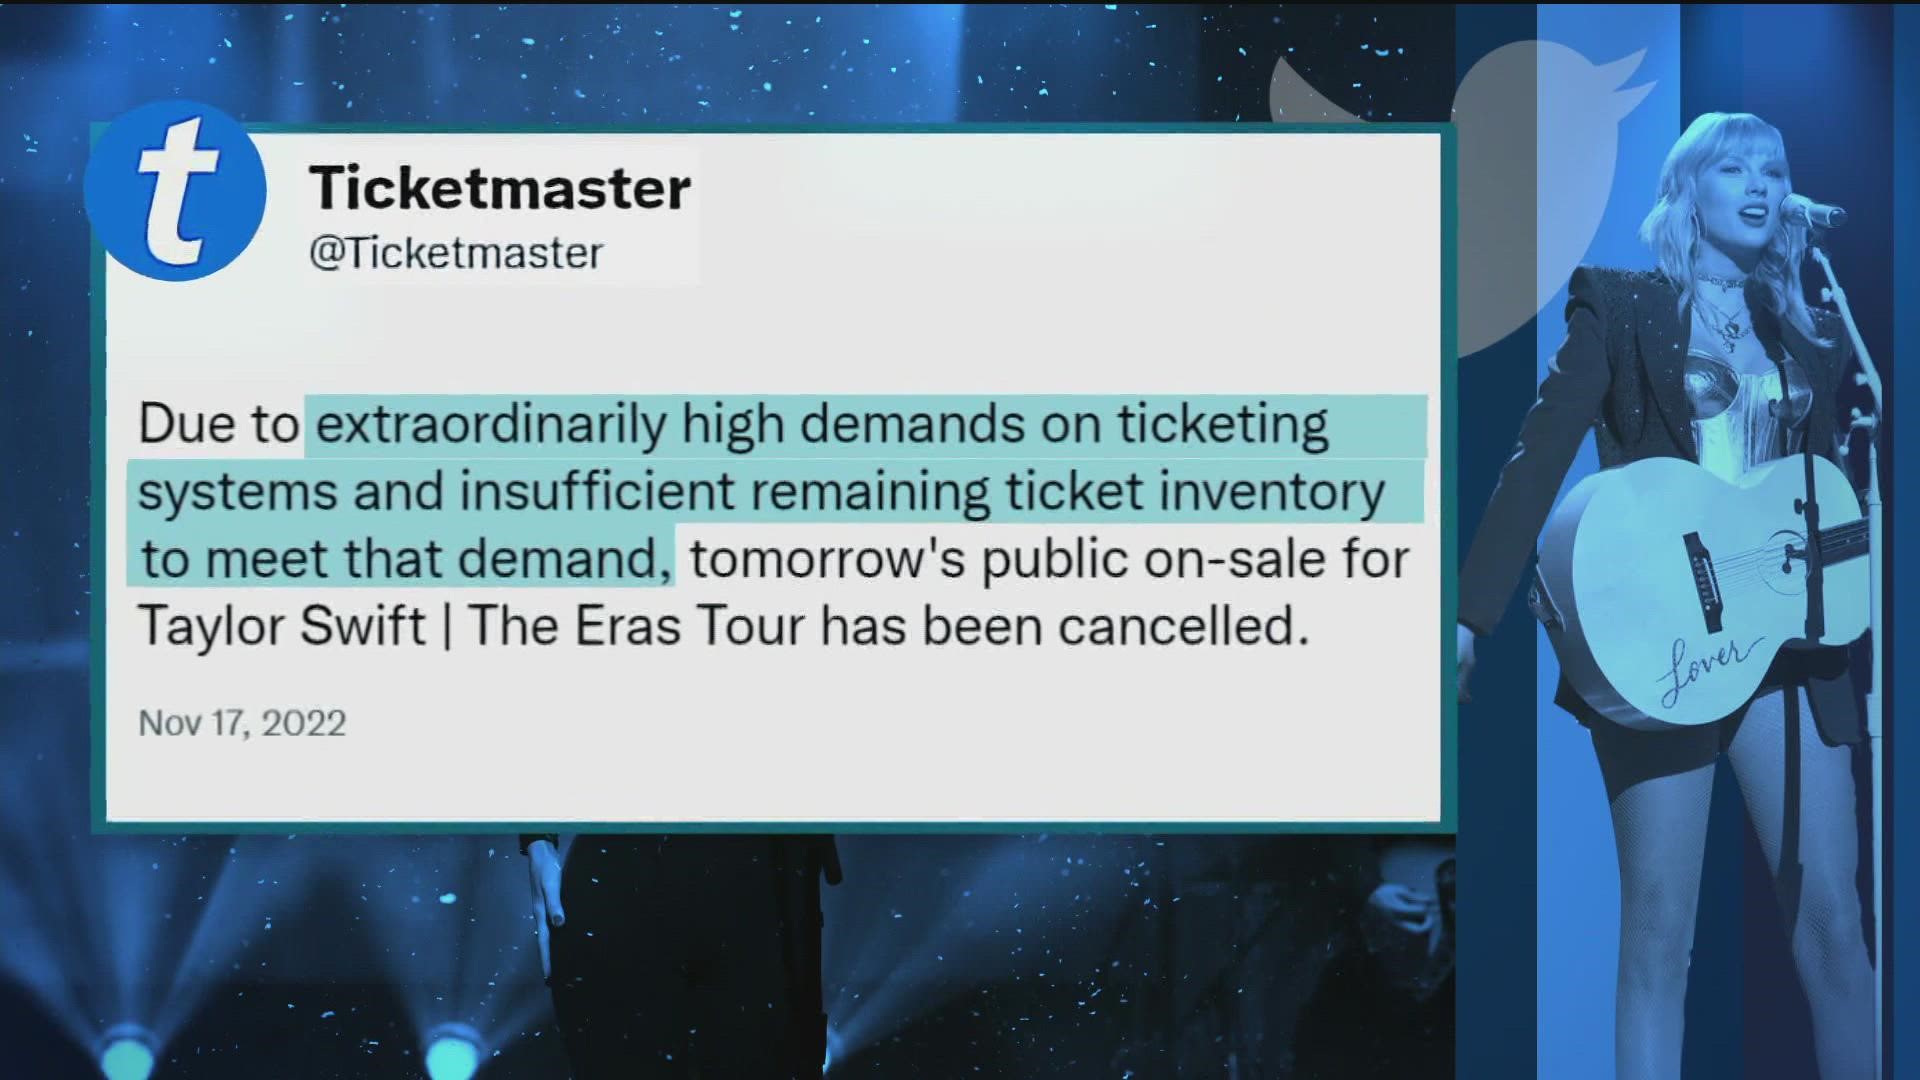 The announcement comes days after Ticketmaster sold over 2 million tickets to Swift's 52-date stadium tour, a record for most ticket sales for one artist in a day.